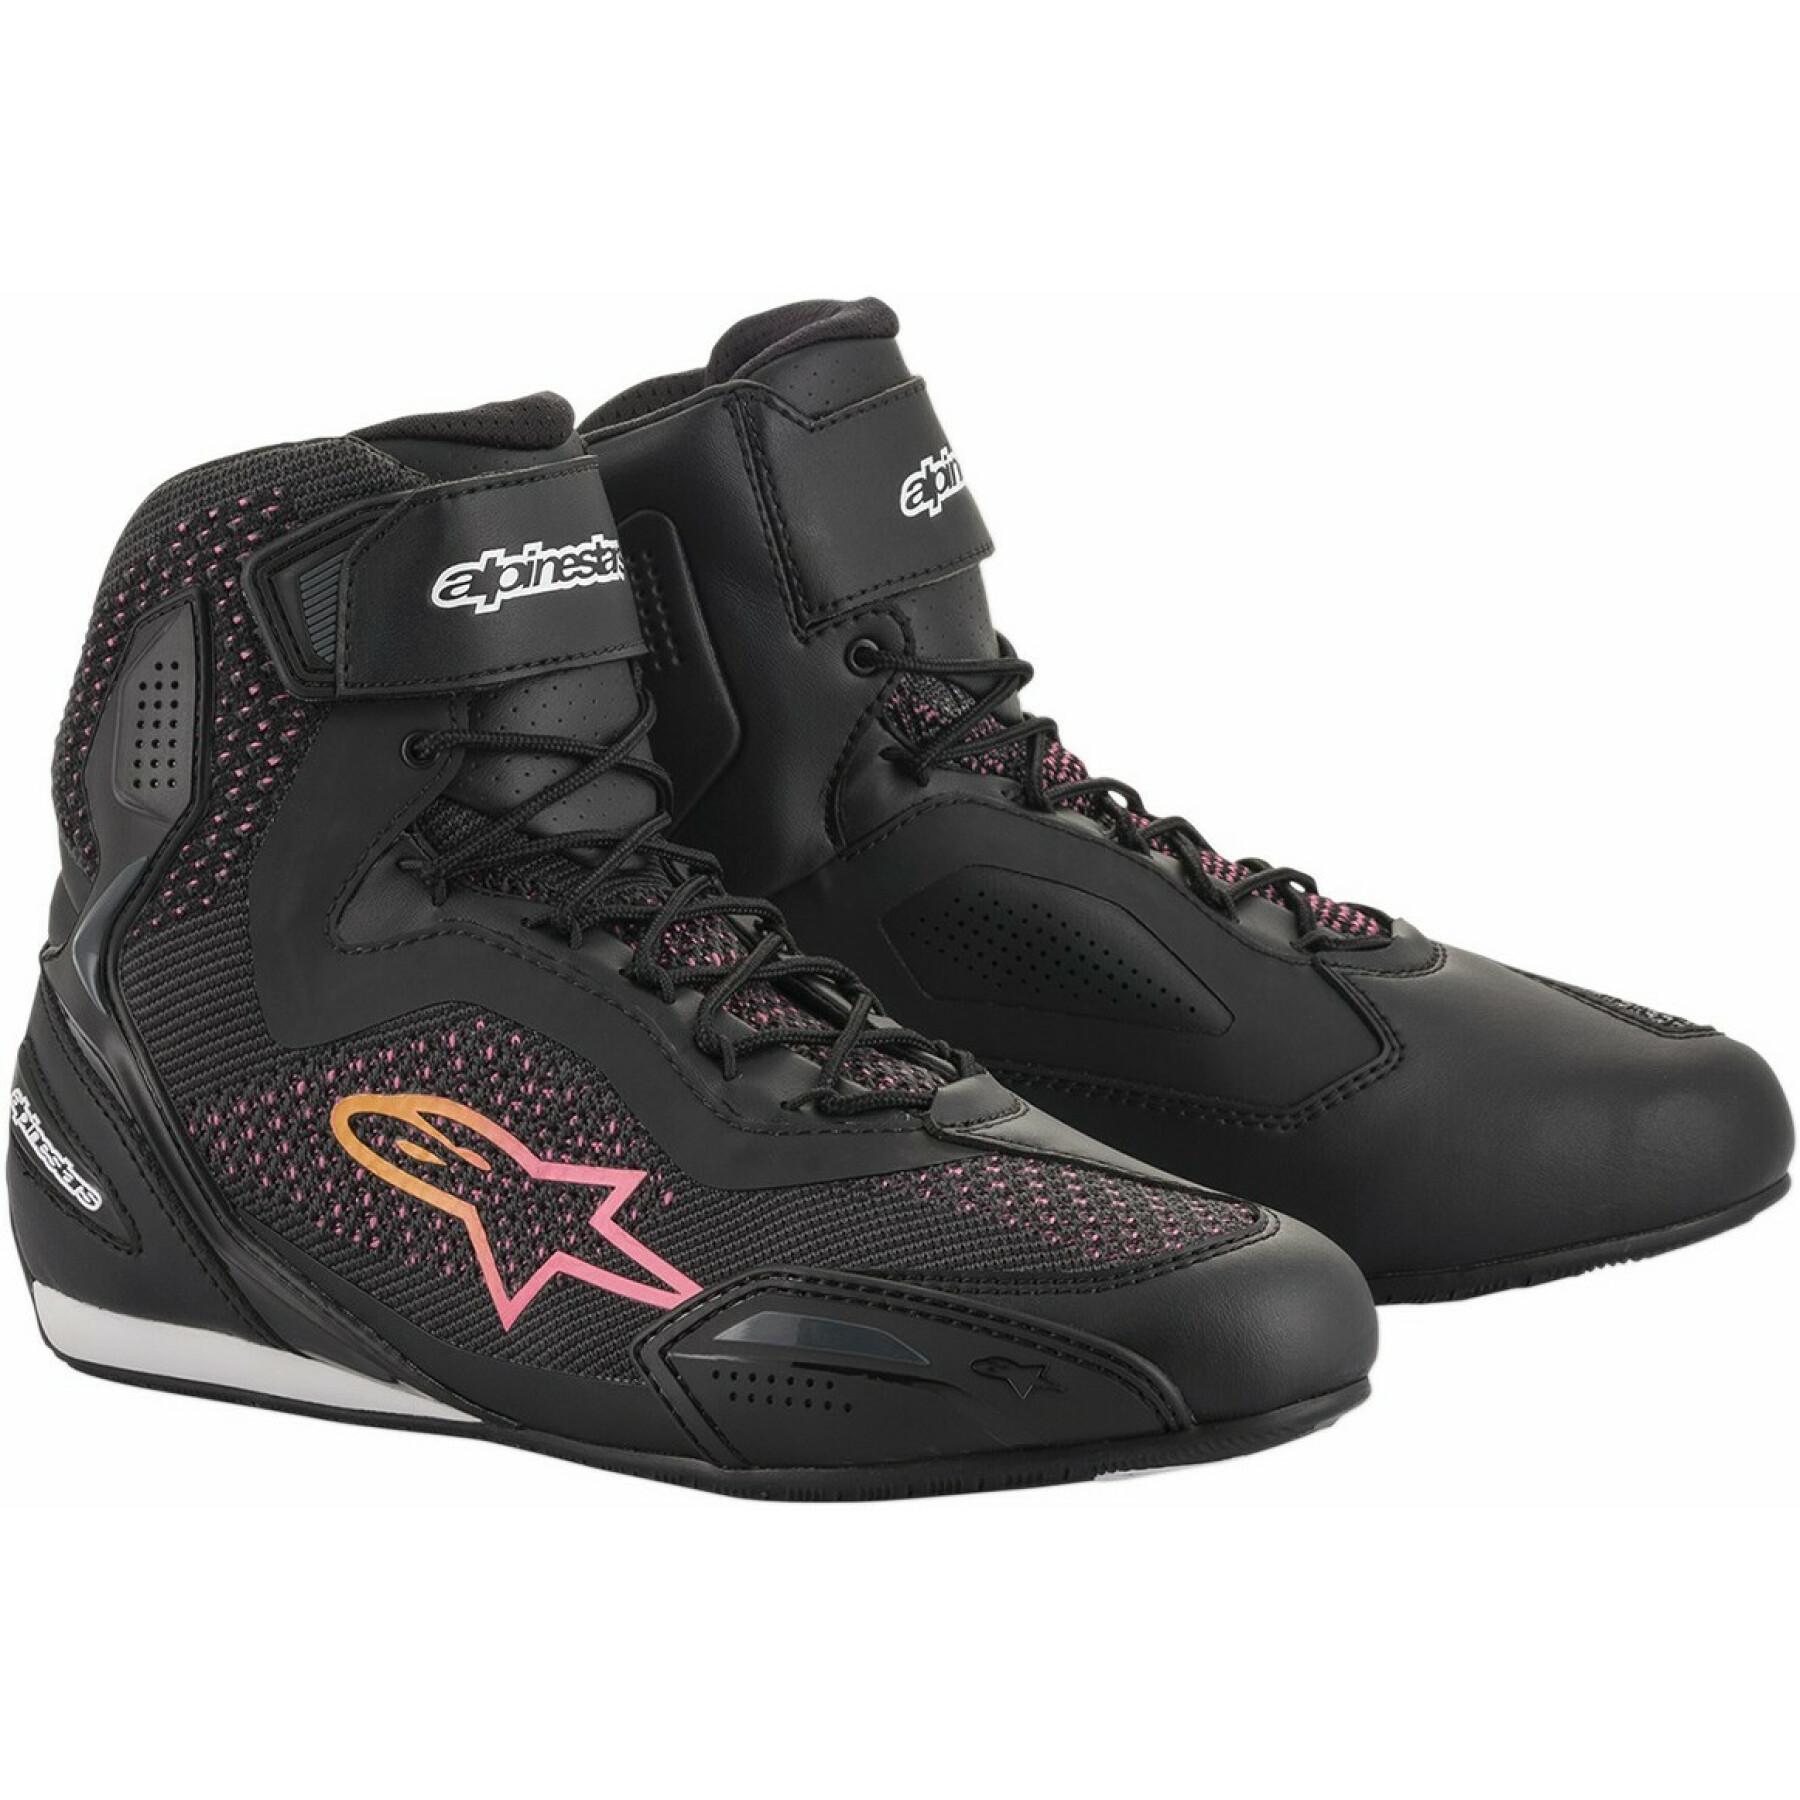 Motorcycle shoes for women Alpinestars 4W Fast3 RK BYP